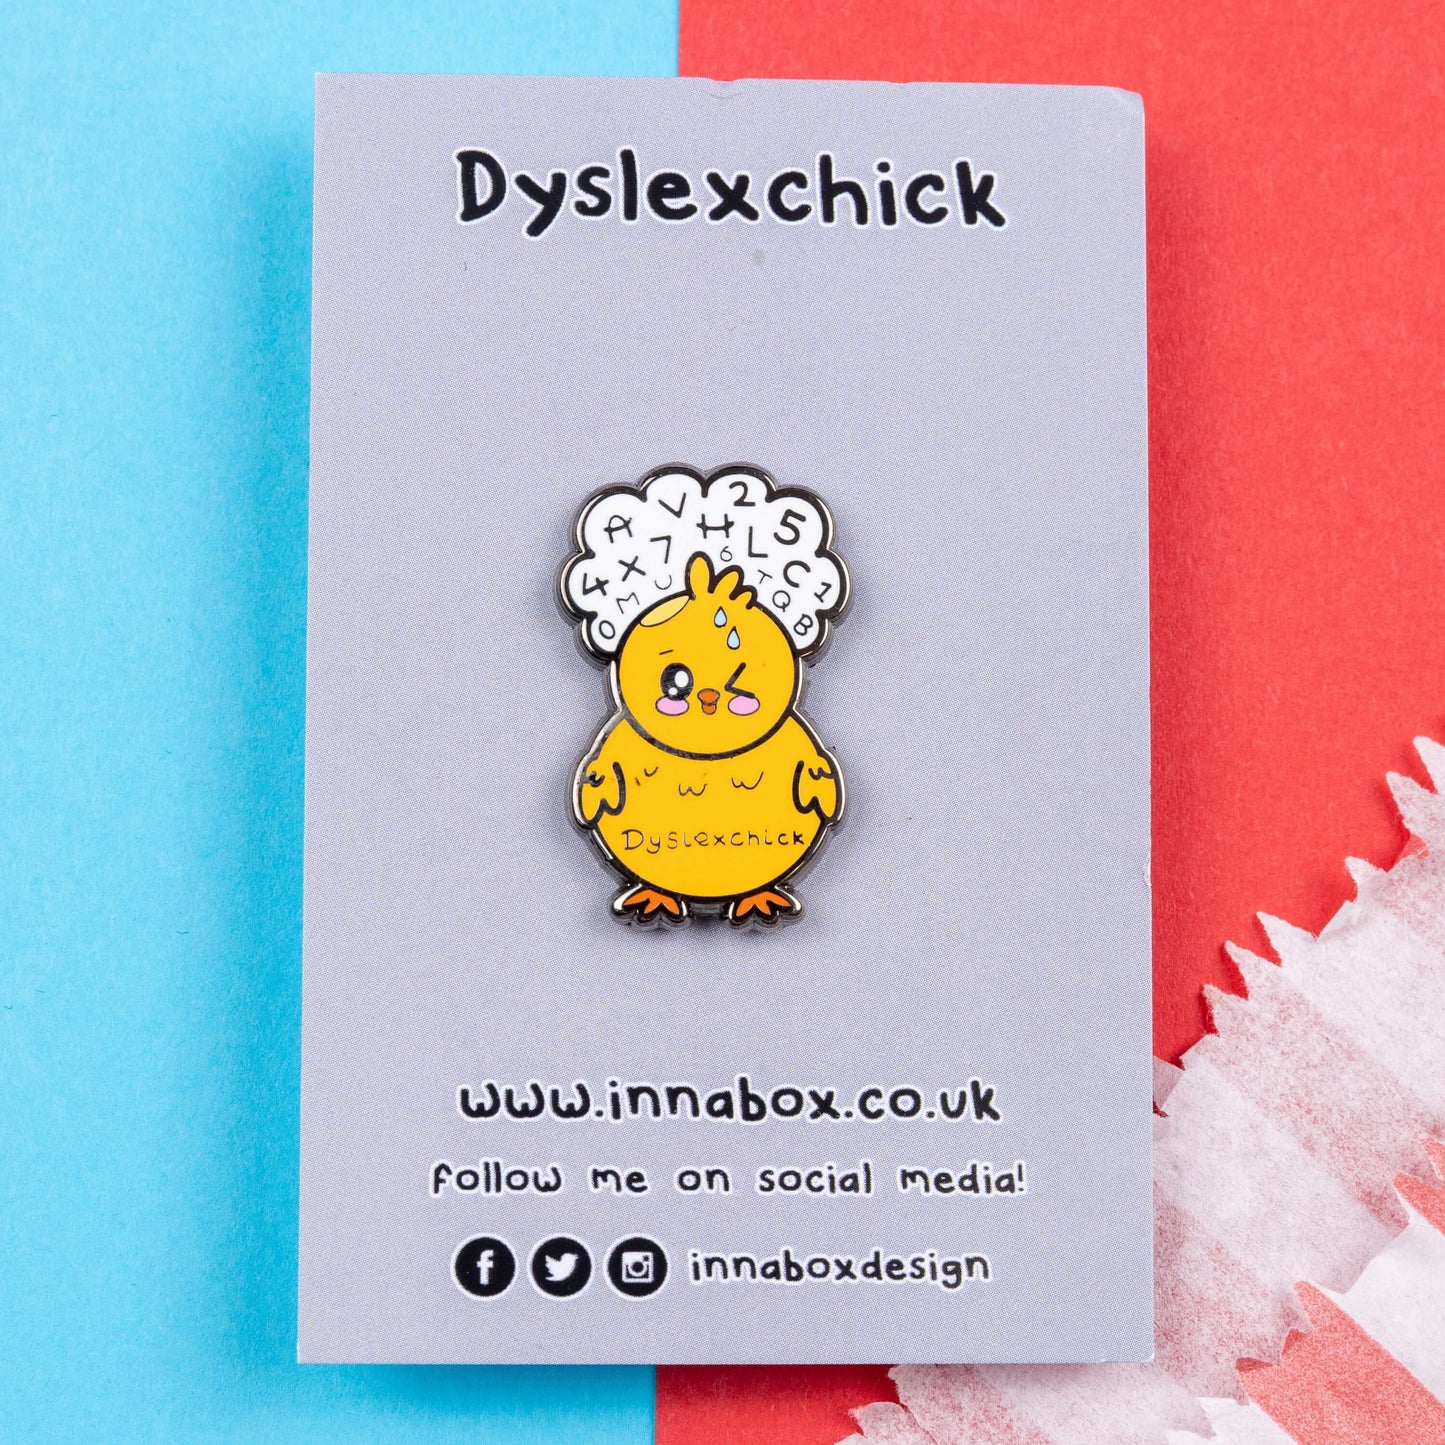 The Dyslexchick Enamel Pin - Dyslexia on grey backing card laid on a red and blue background. A yellow confused chick shaped pin badge with a thought bubble above its head full of letters and numbers with 'dyslexchick' written across its middle. The hand drawn design is raising awareness for dyslexia.